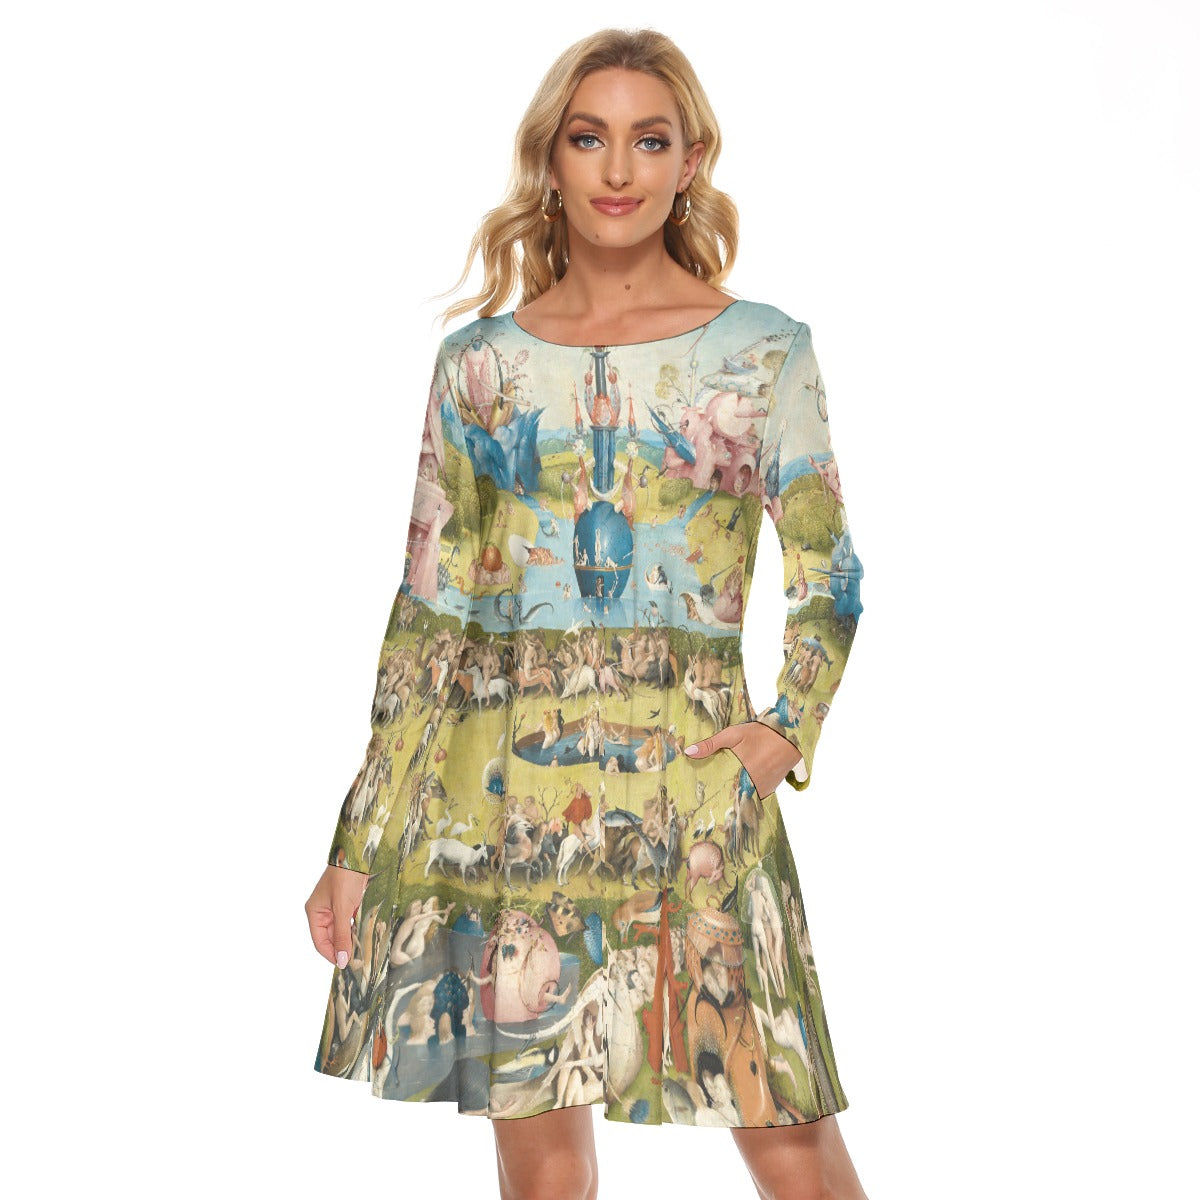 Hieronymus Bosch Dress with Earthly Delights Design